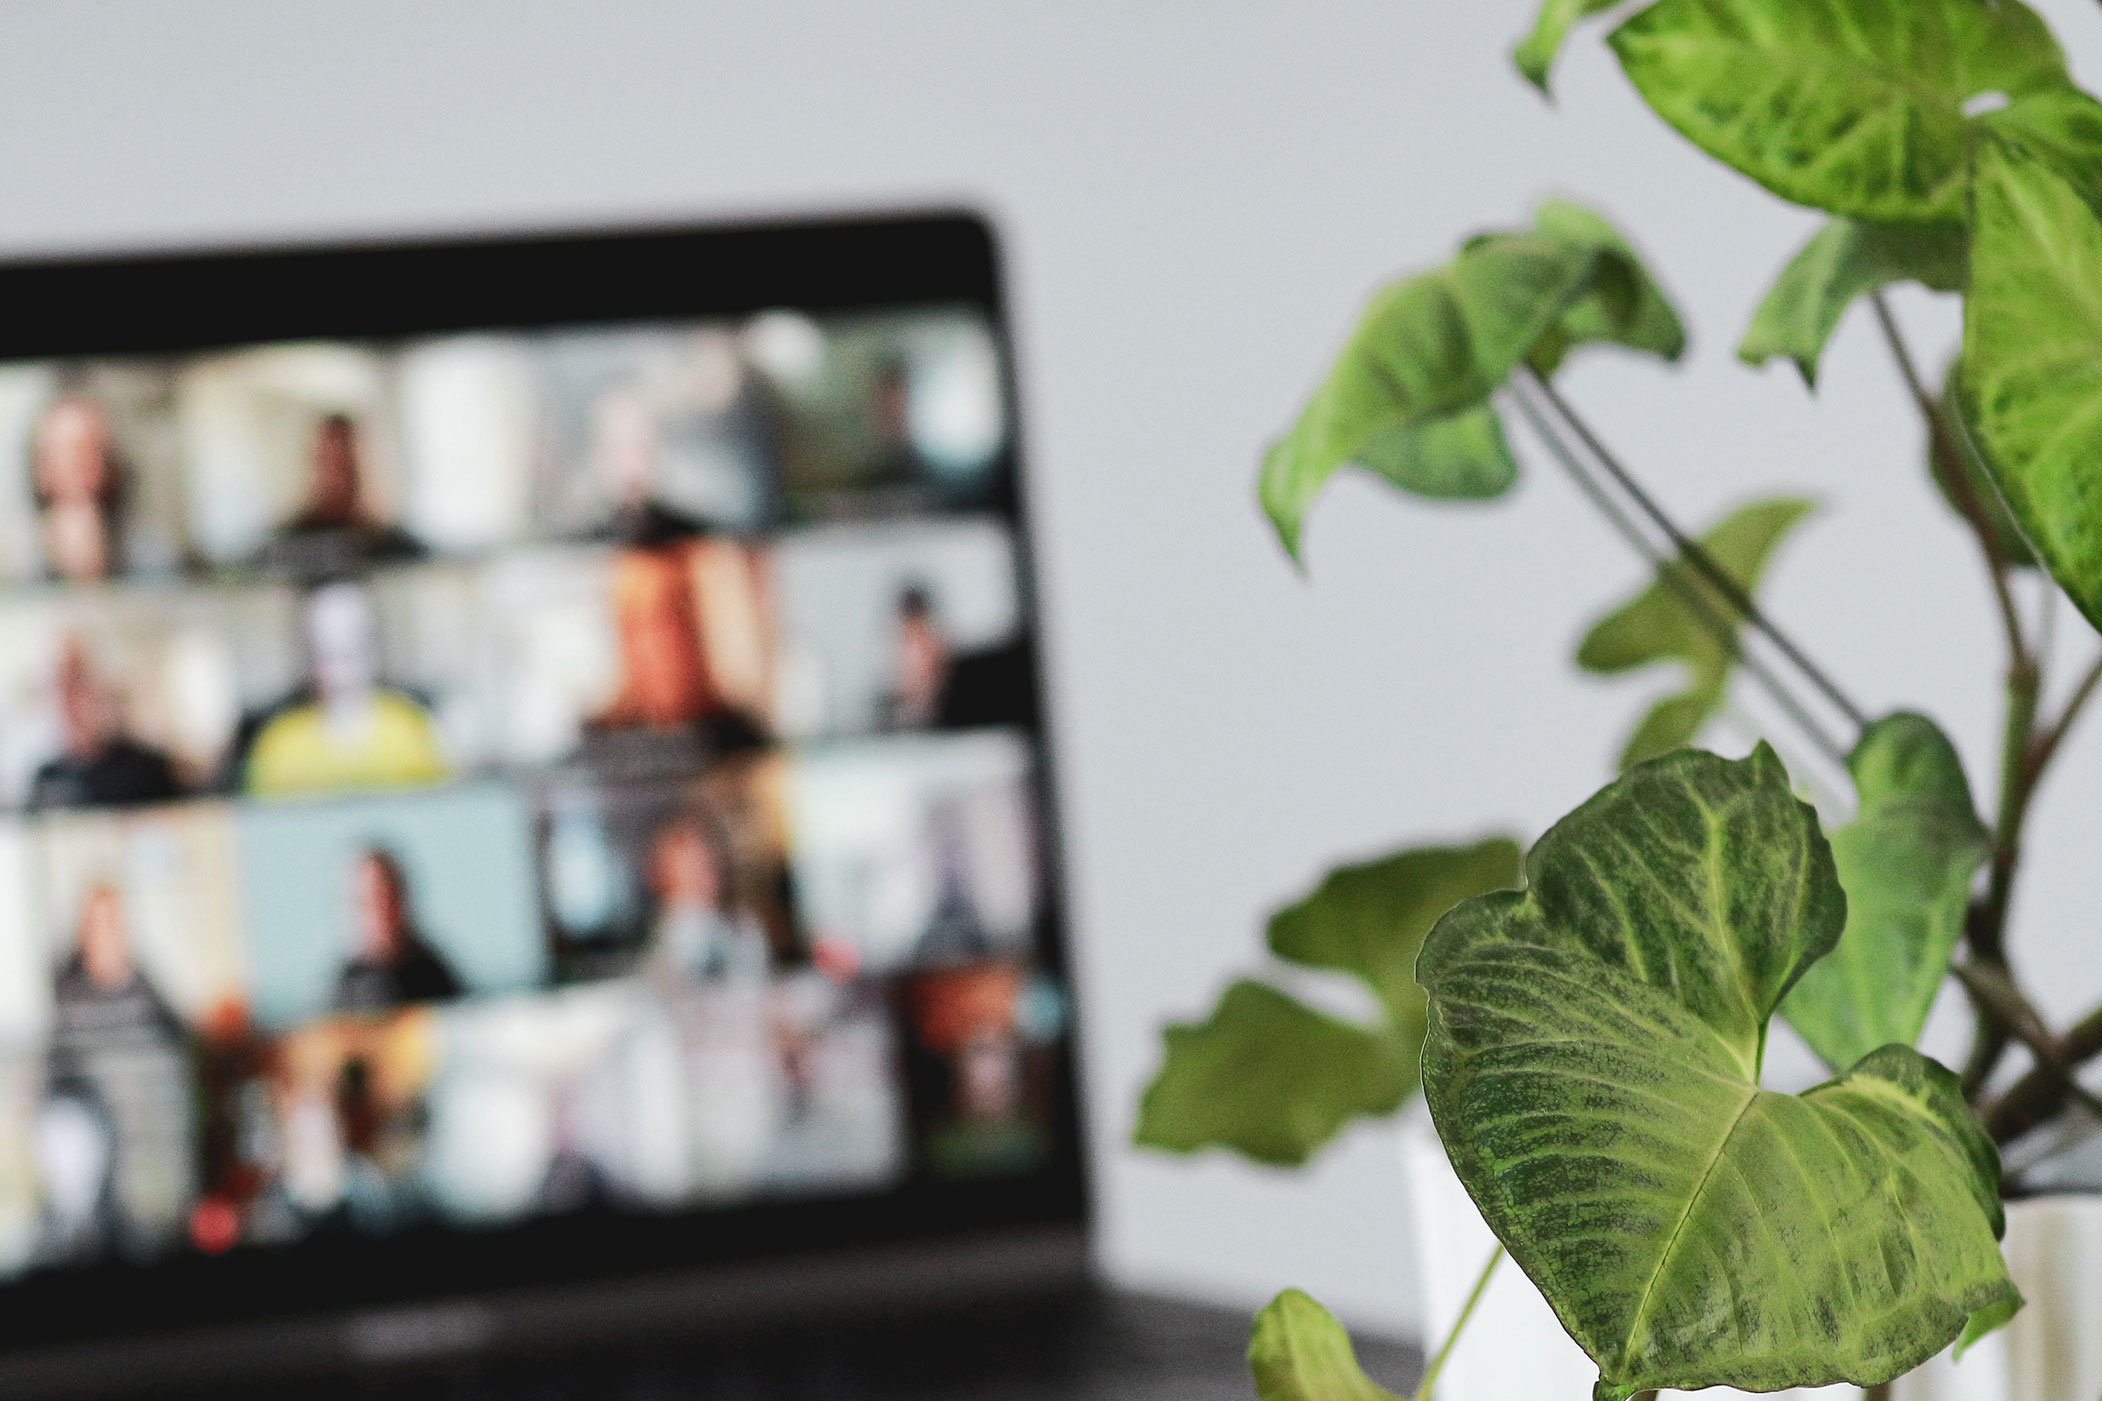 Photo of a plant in front of a computer. On the computer screen is a series of webcams during a virtual meeting.